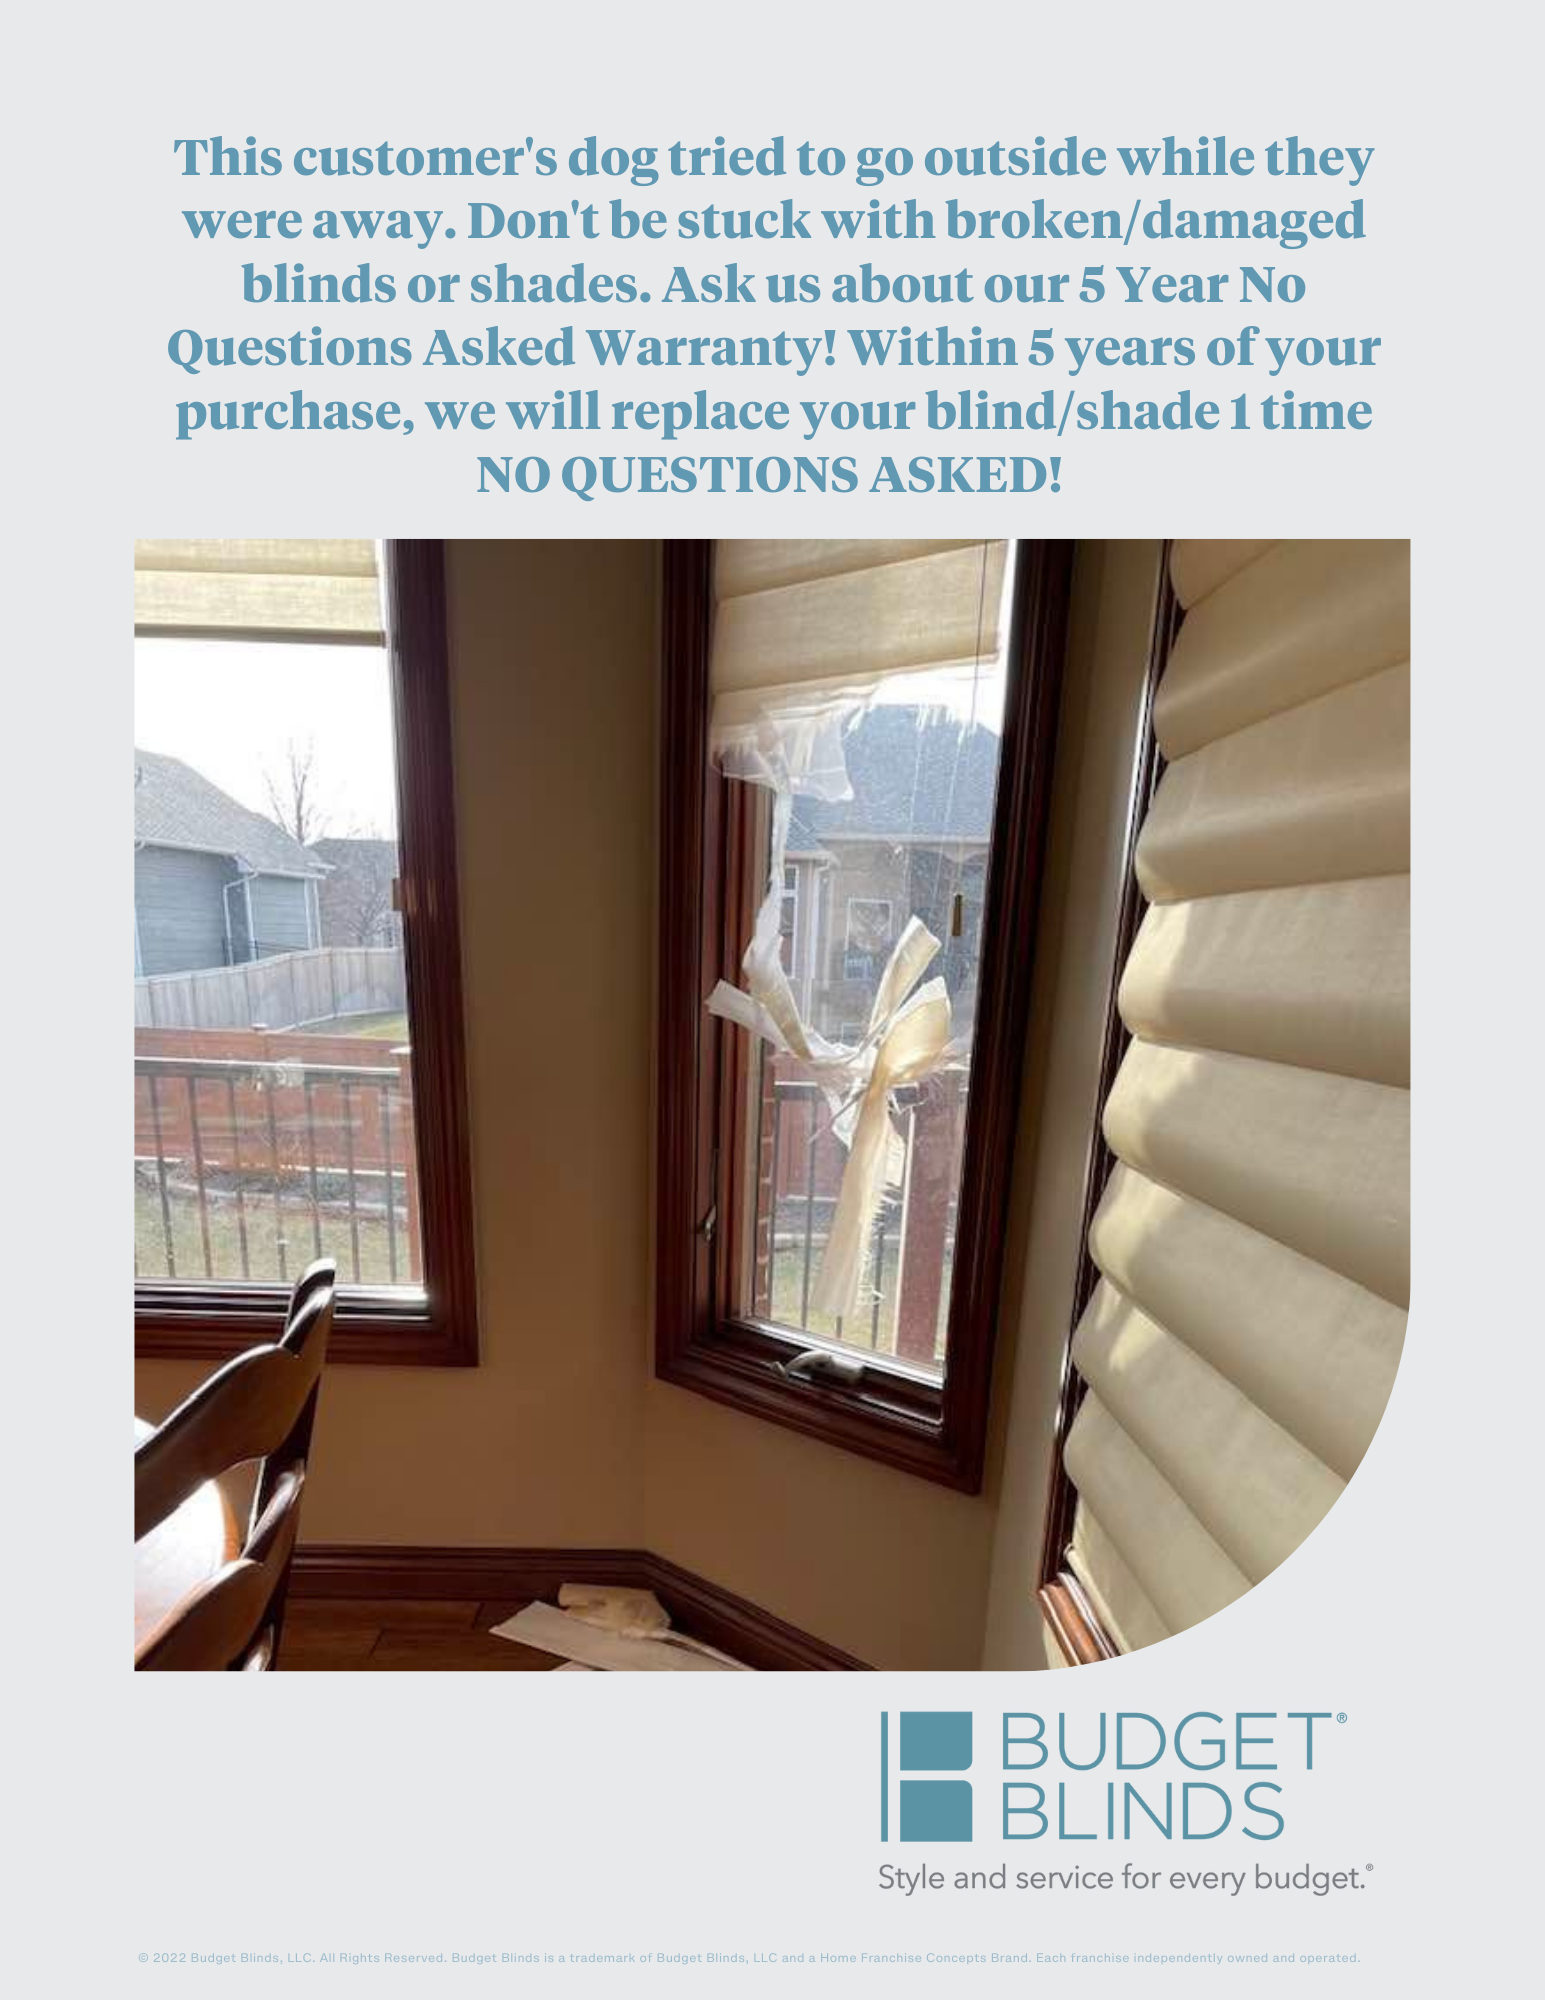 Budget Blinds offers the best warranty in our industry. Ask about our 5 year, NO QUESTIONS ASKED replacement guarantee.